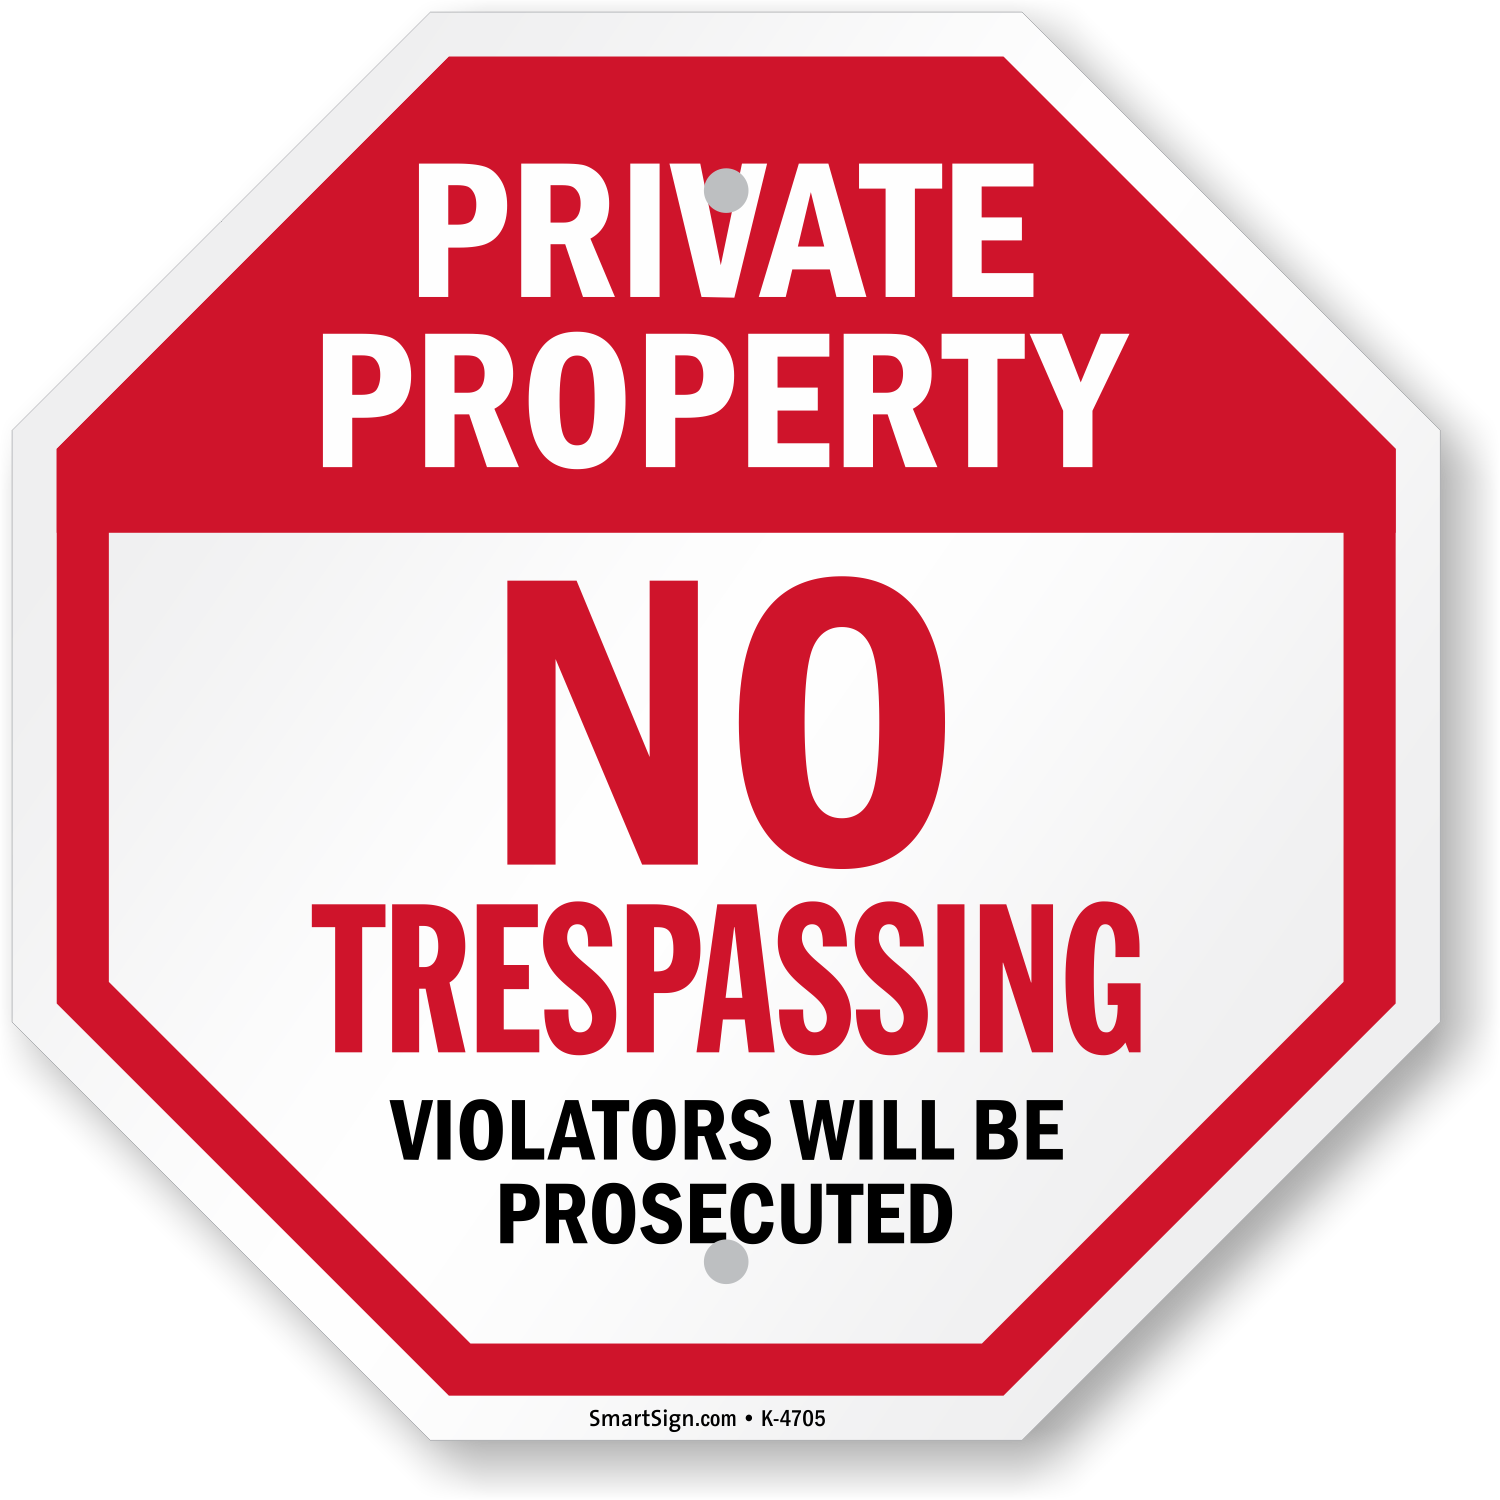 No Public Right of Way Sign Warning Notice Adhesive 6.5"x1.5" PRIVATE PROPERTY 